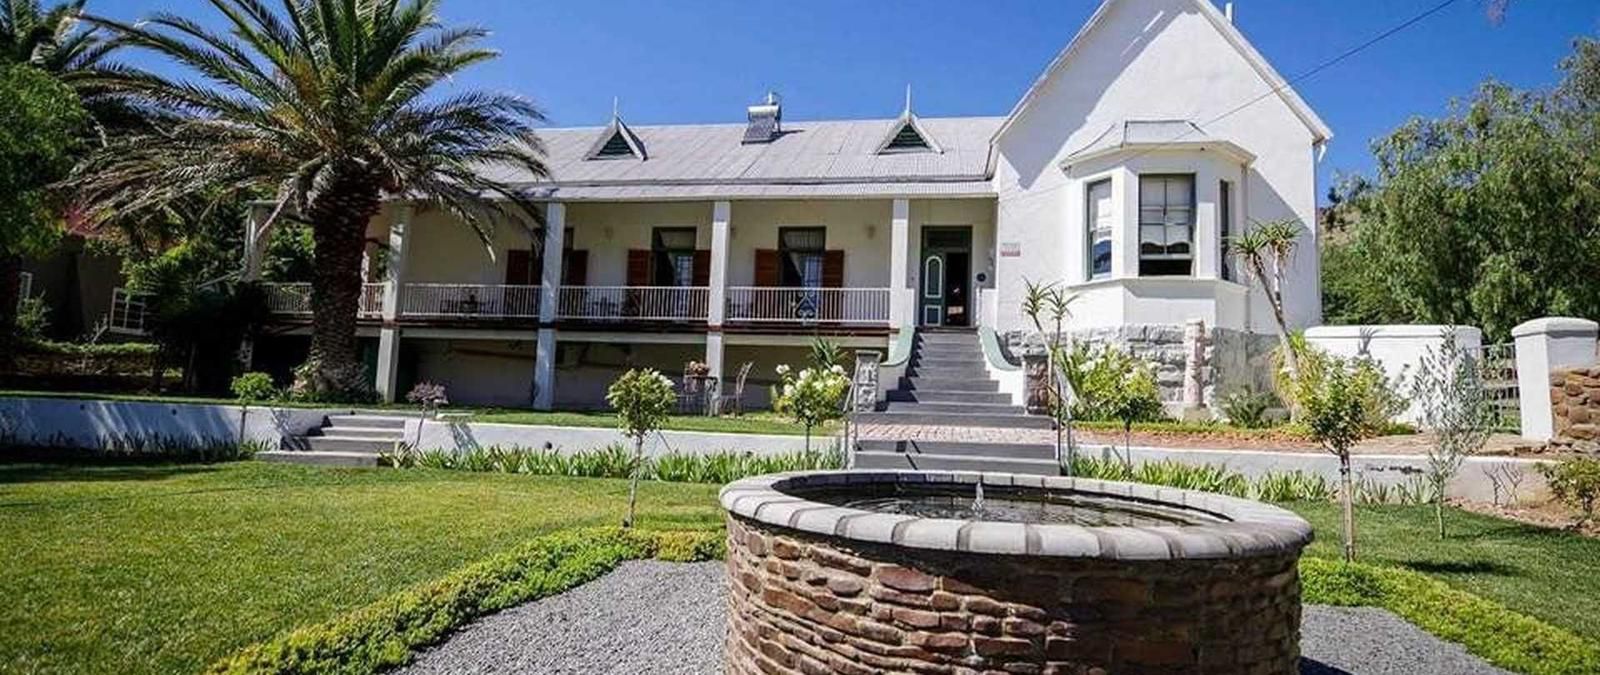 Moonlight Manor Victoria West Northern Cape South Africa Building, Architecture, House, Palm Tree, Plant, Nature, Wood